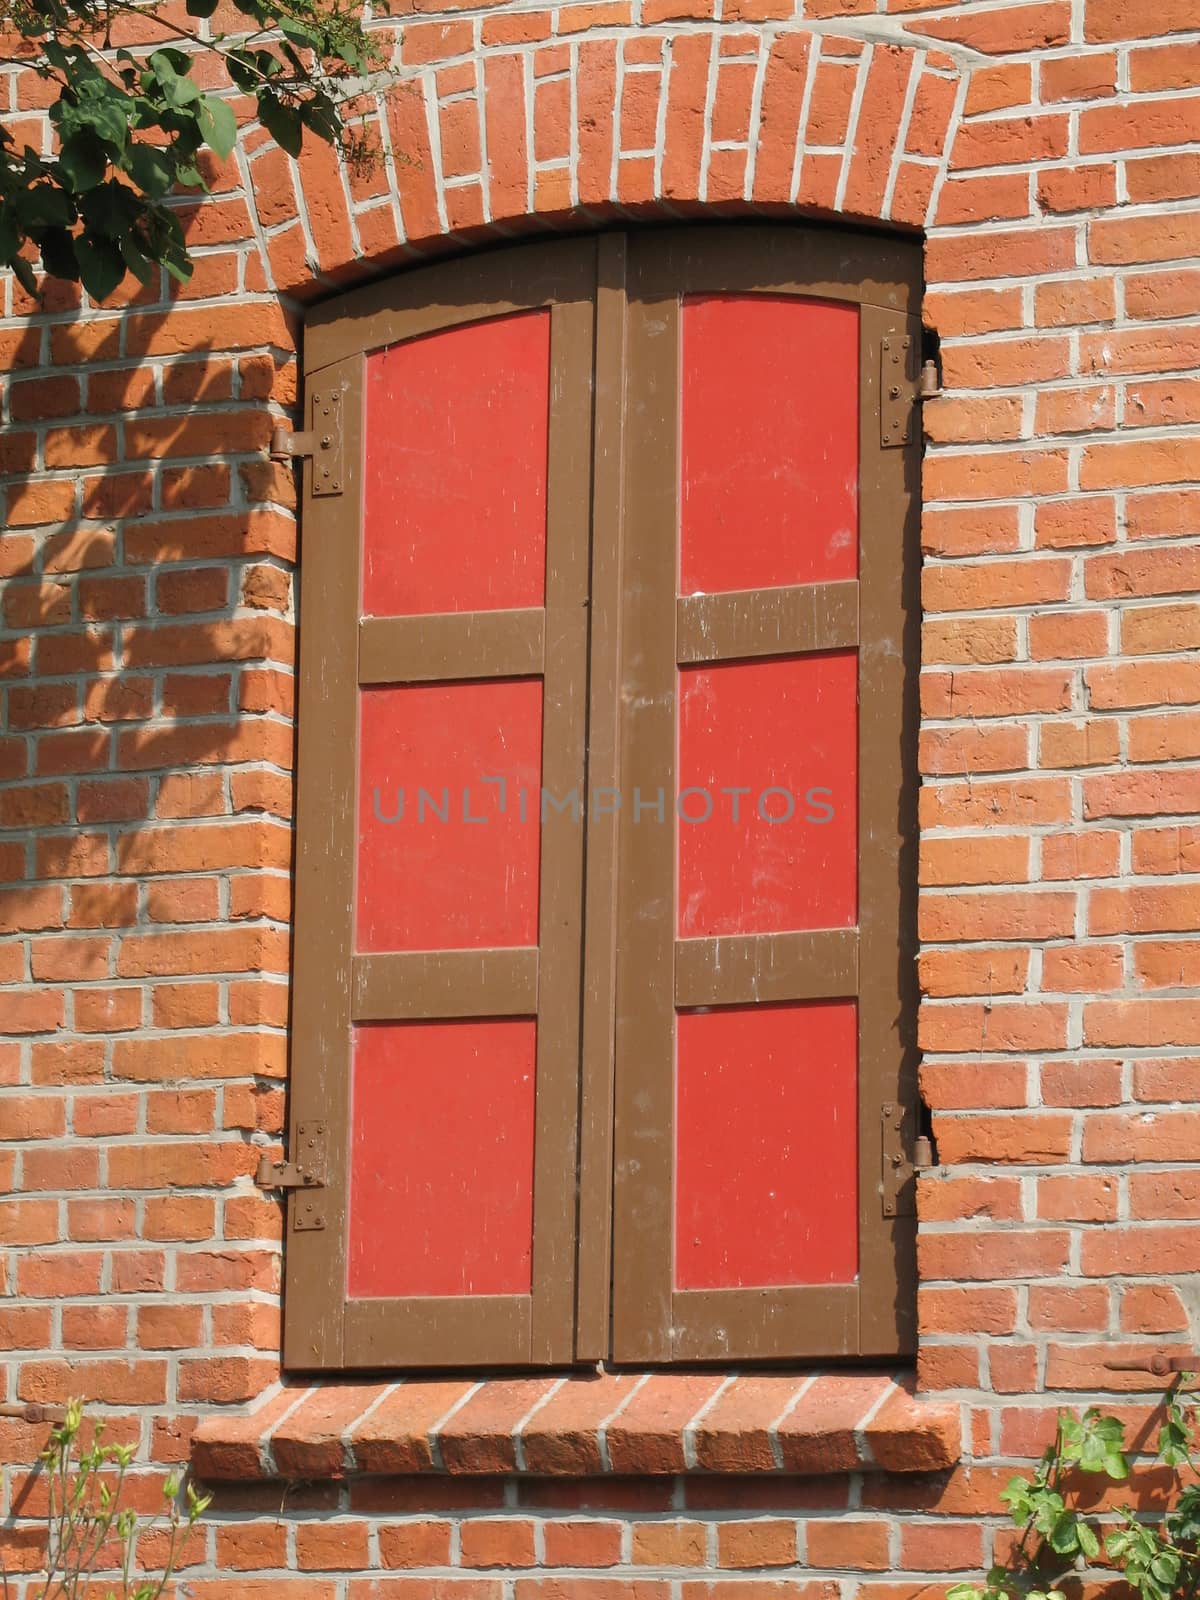 Shutters made of wood painted in the colors colours red and brown.